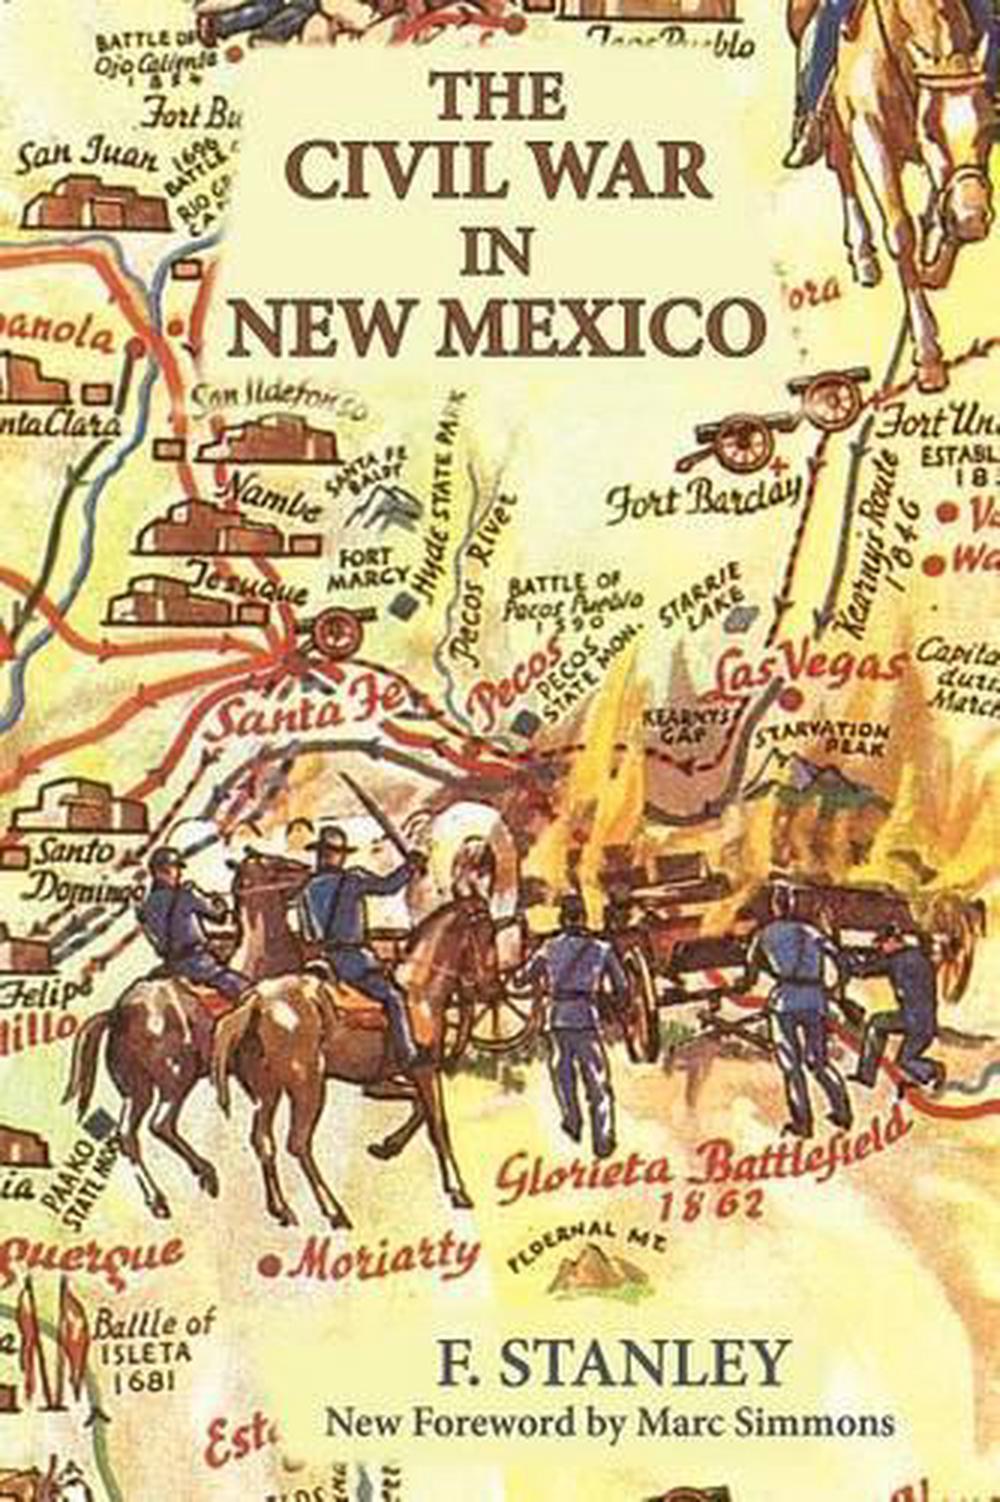 The Civil War in New Mexico by F. Stanley (English) Paperback Book Free